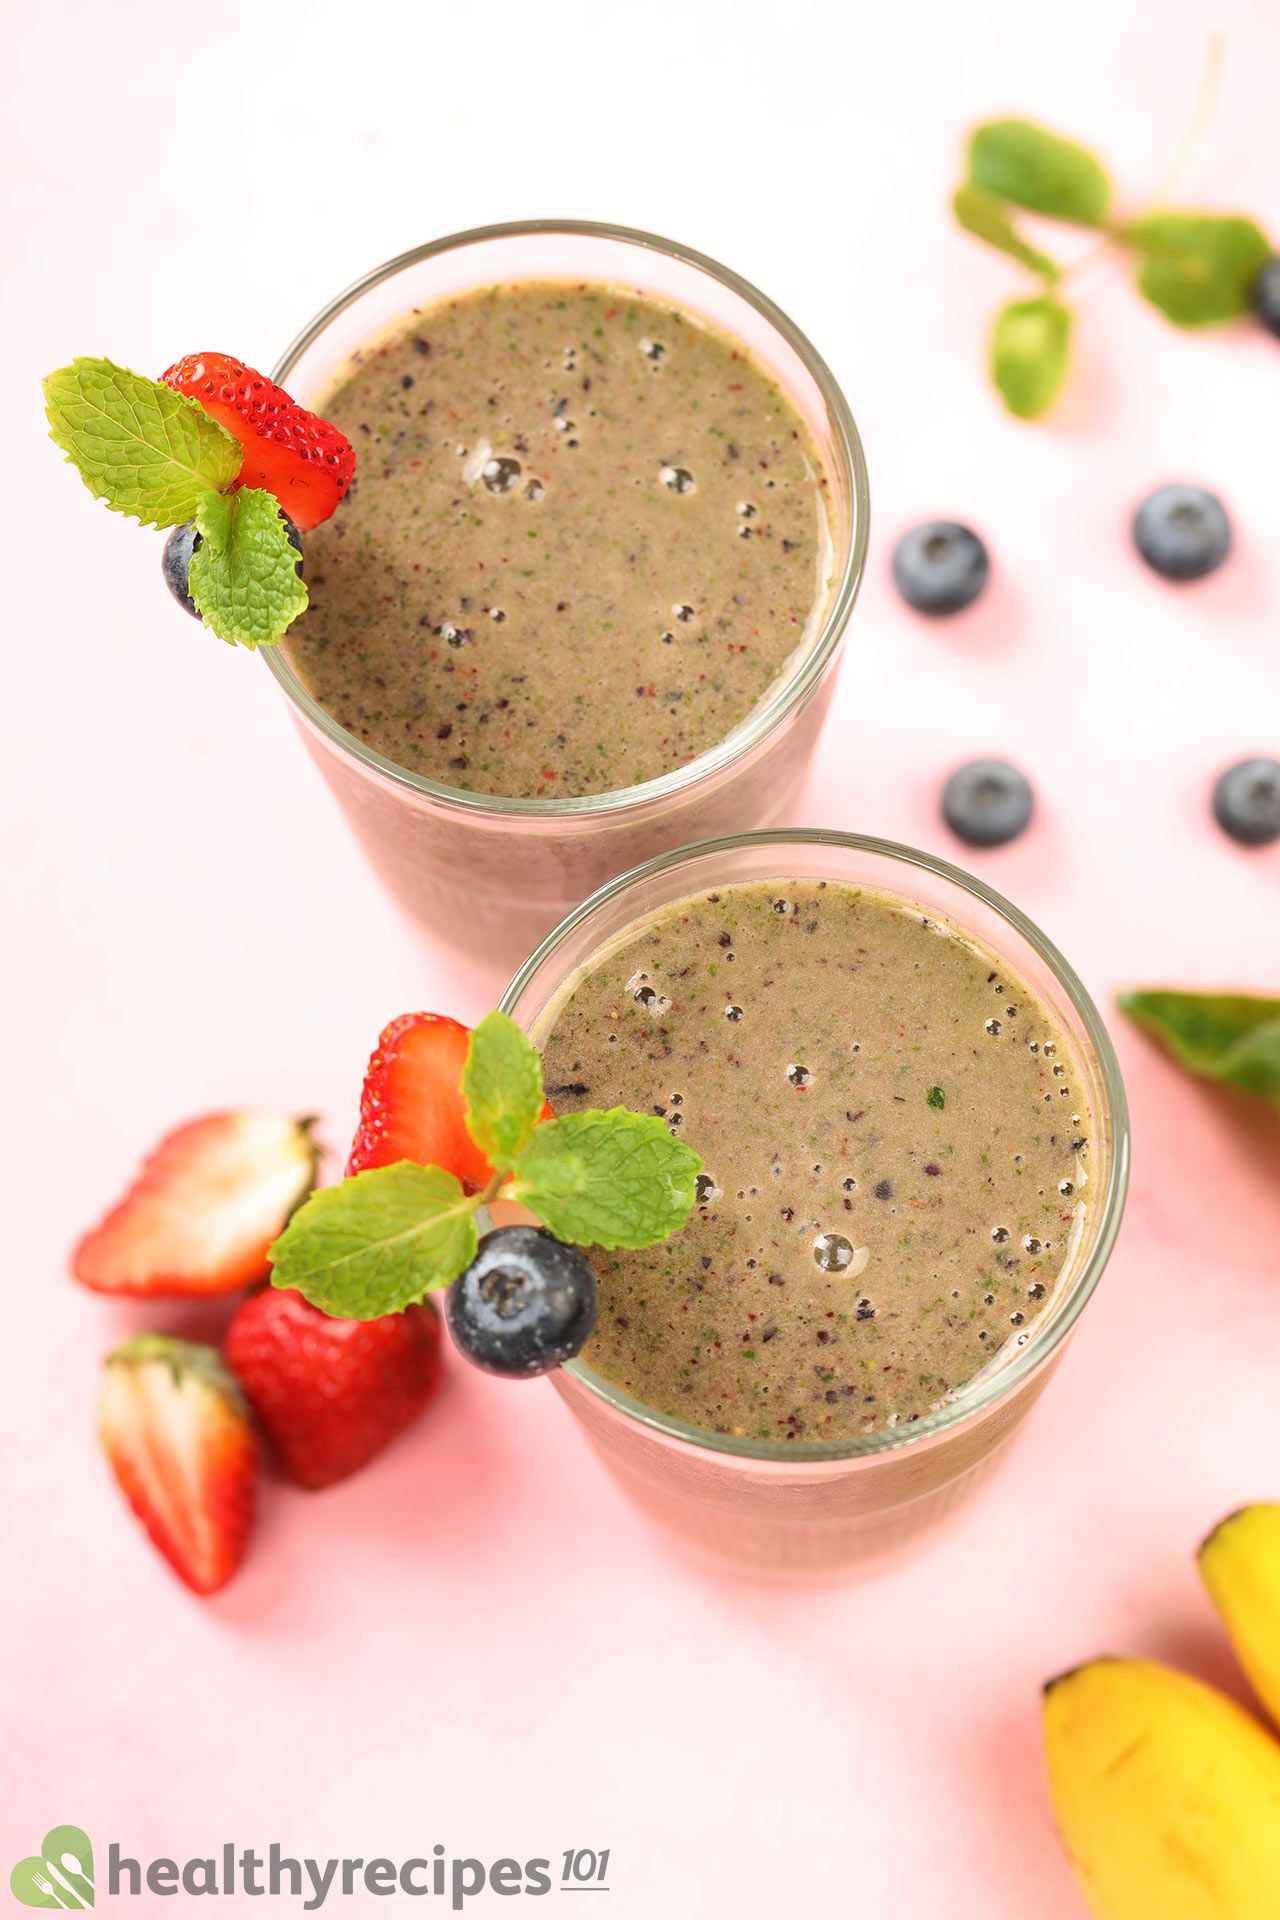 What Berries to Use in Spinach Berry Smoothie